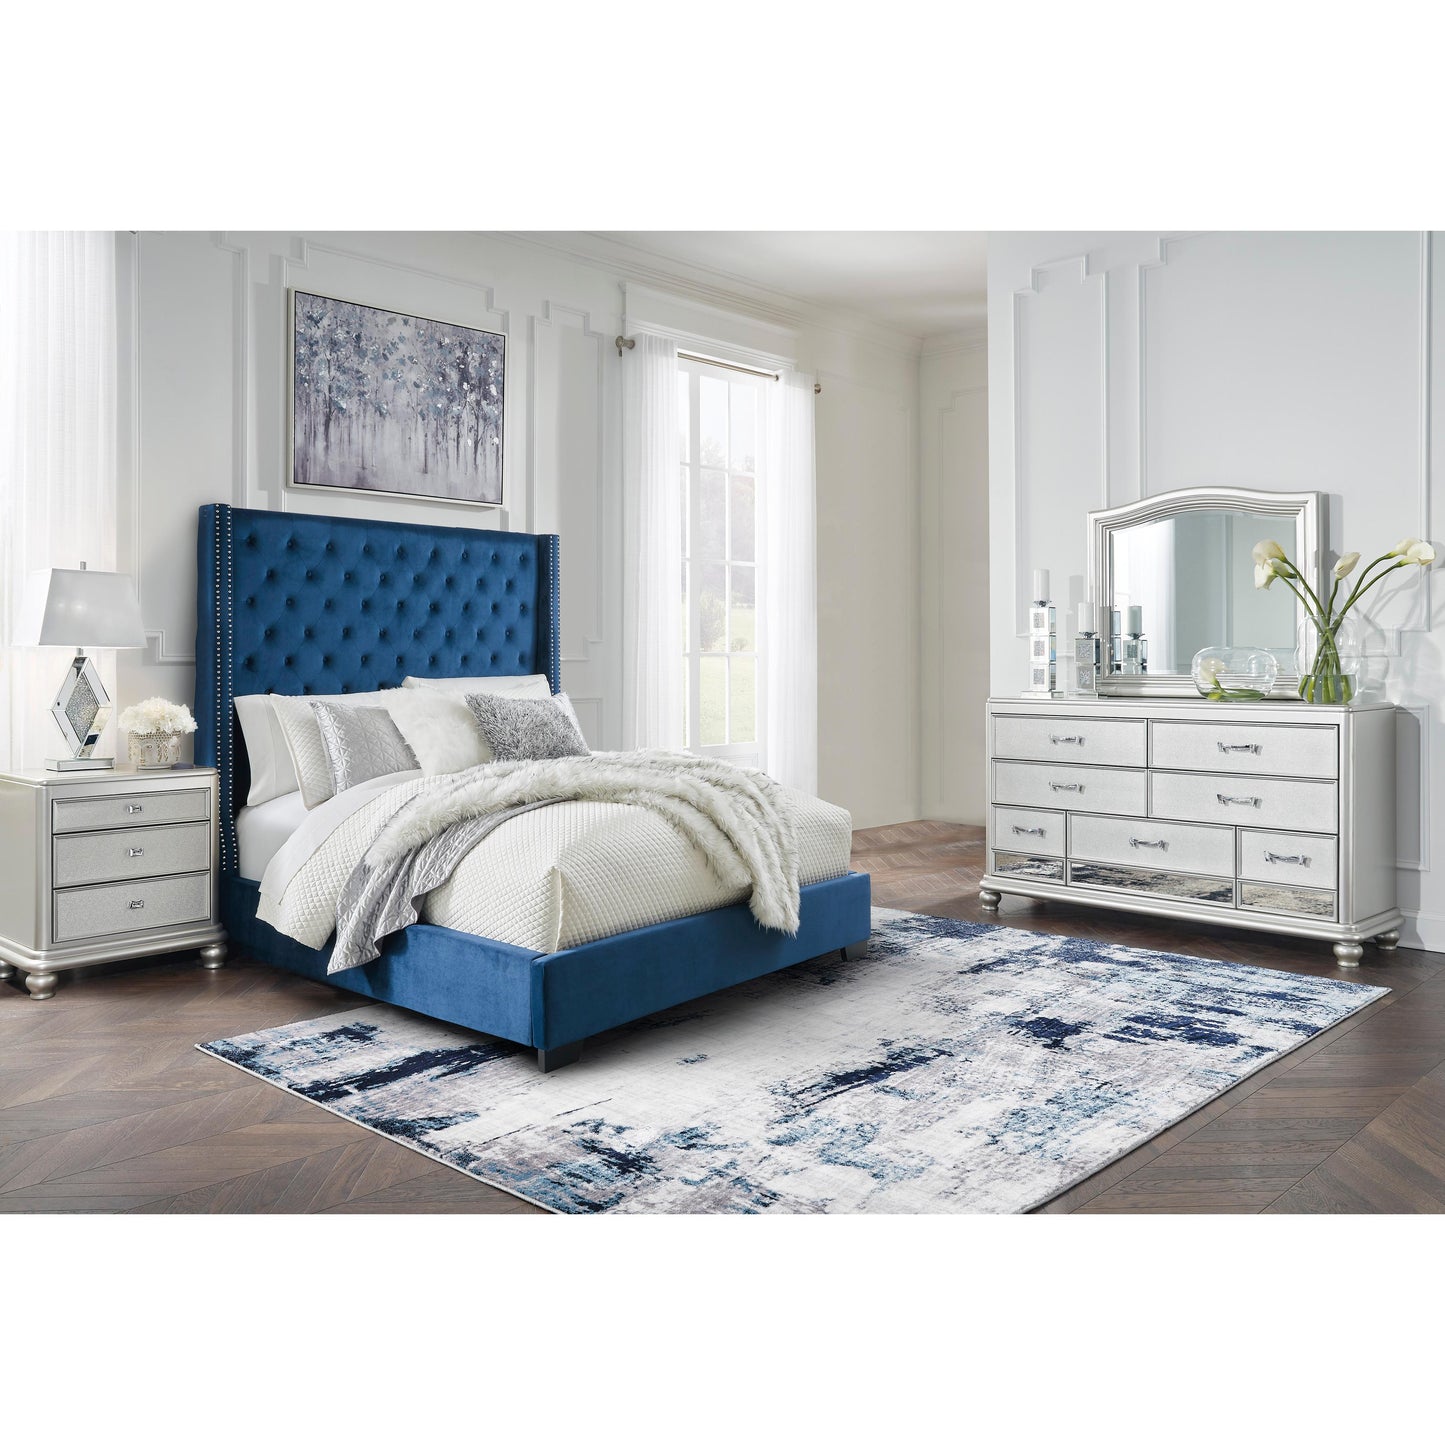 Signature Design by Ashley Coralayne B650B28 6 pc Queen Upholstered Bedroom Set IMAGE 1